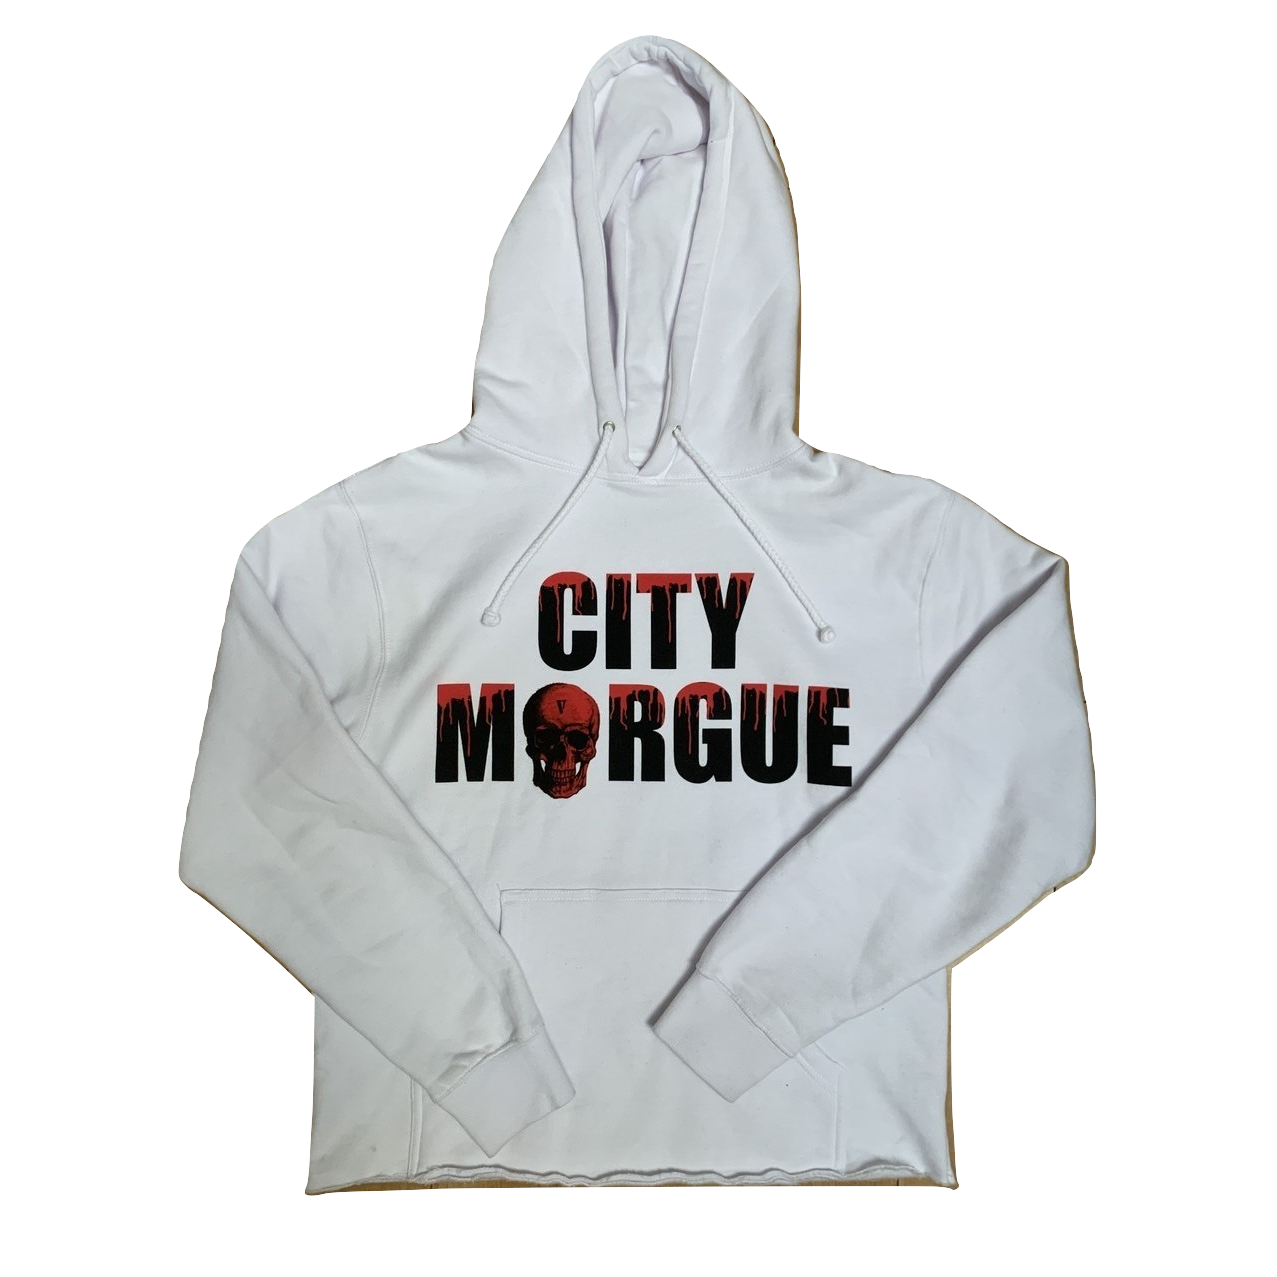 City Morgue x VLone Dogs Cropped Hoodie - White - Used